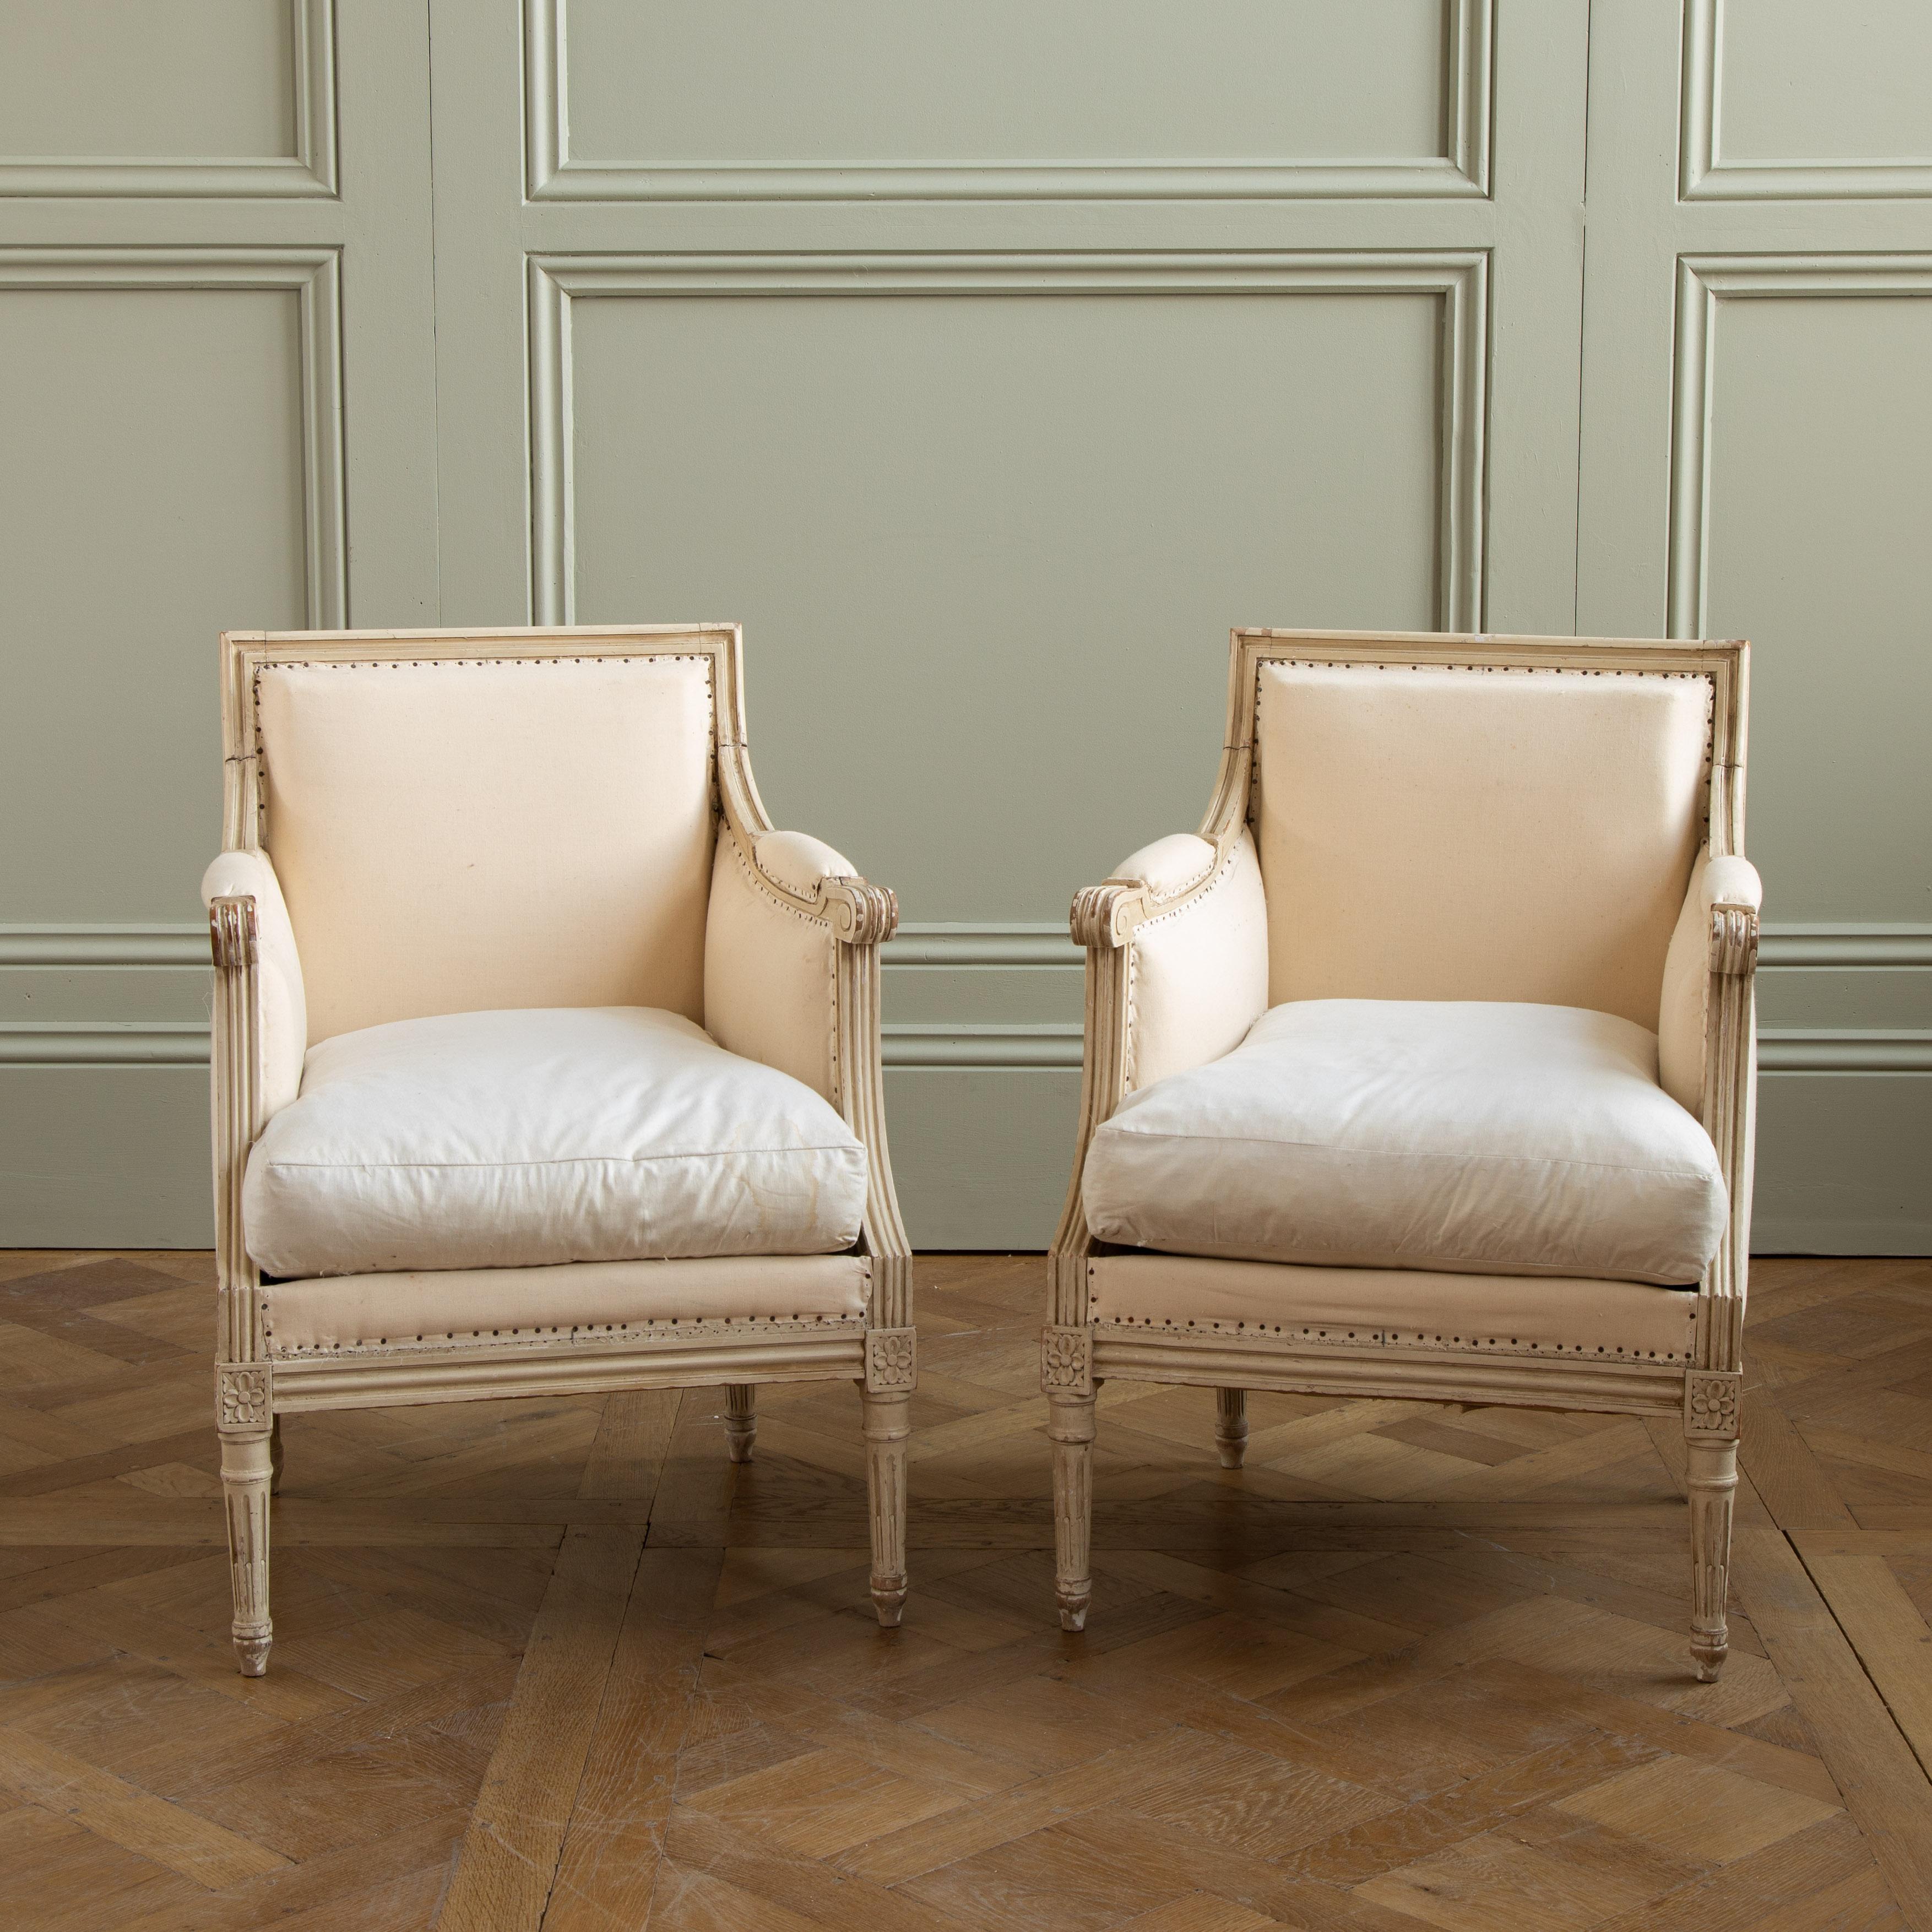 Pair Of French 19th Century Hand Painted Bergere Chairs In Antique White Patina In Good Condition In London, Park Royal